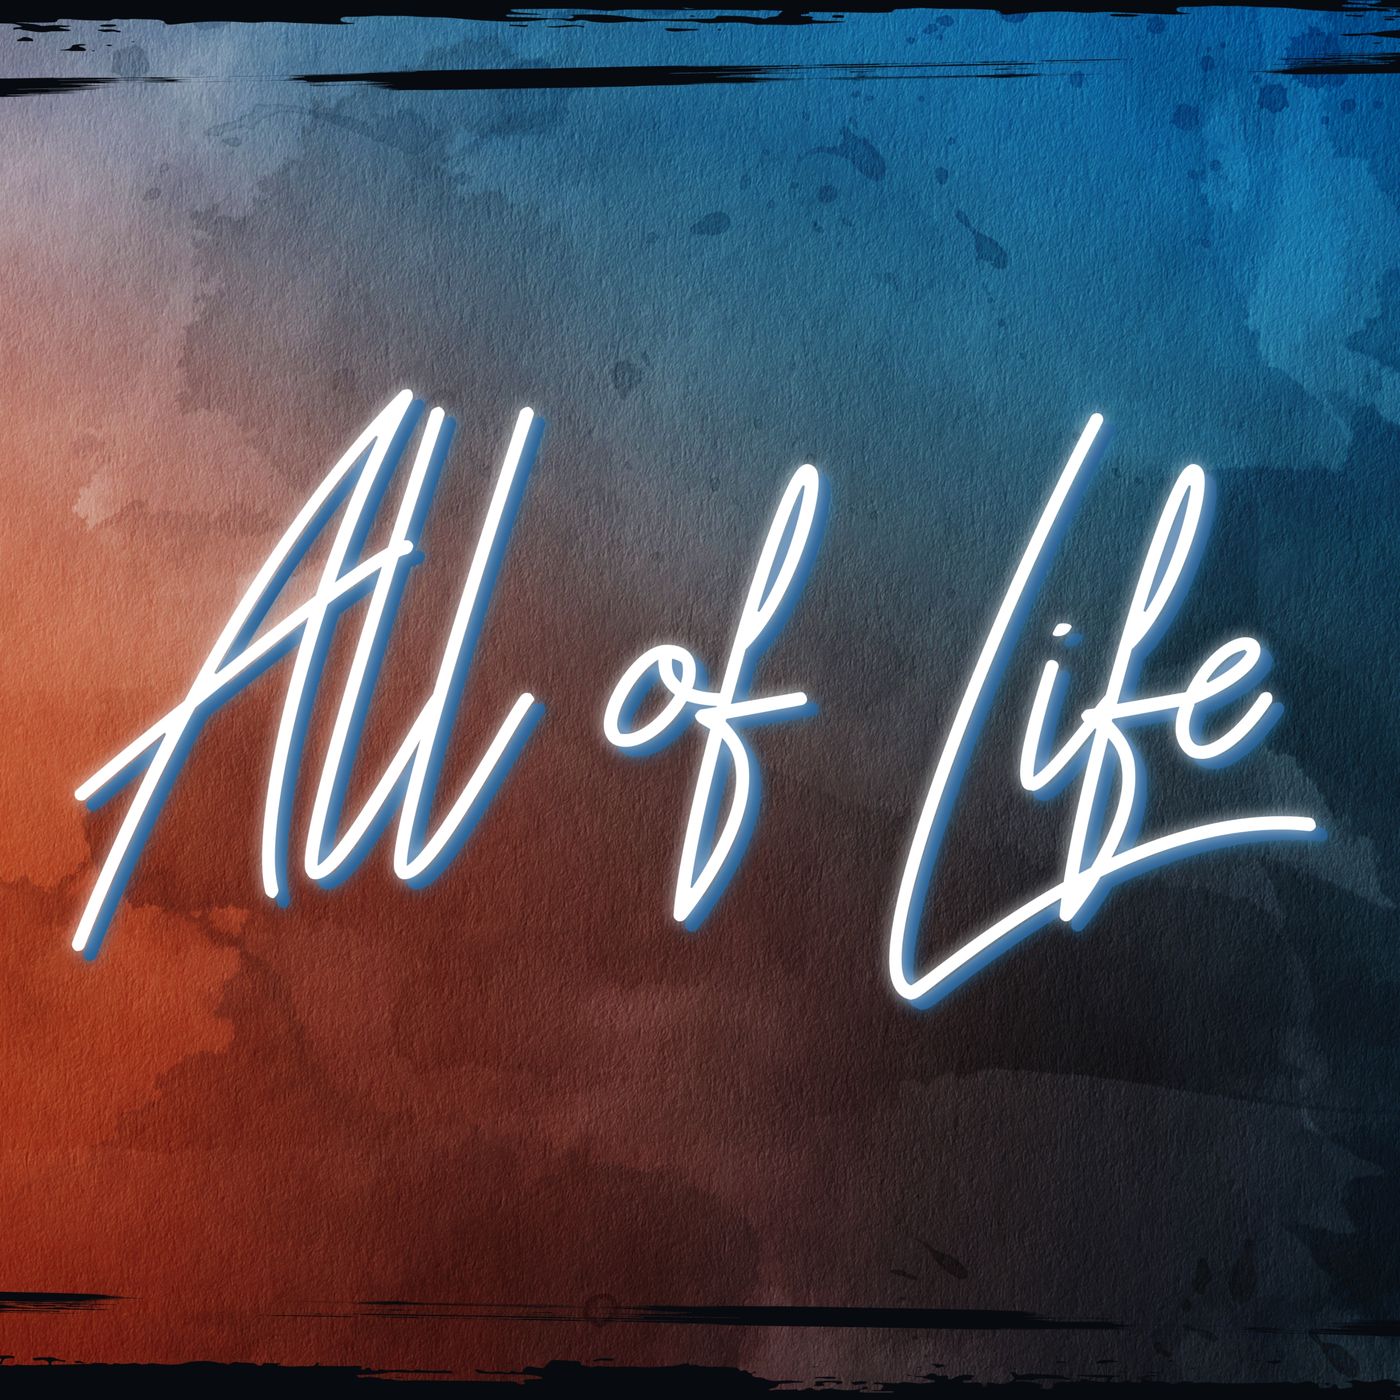 All of Life Show